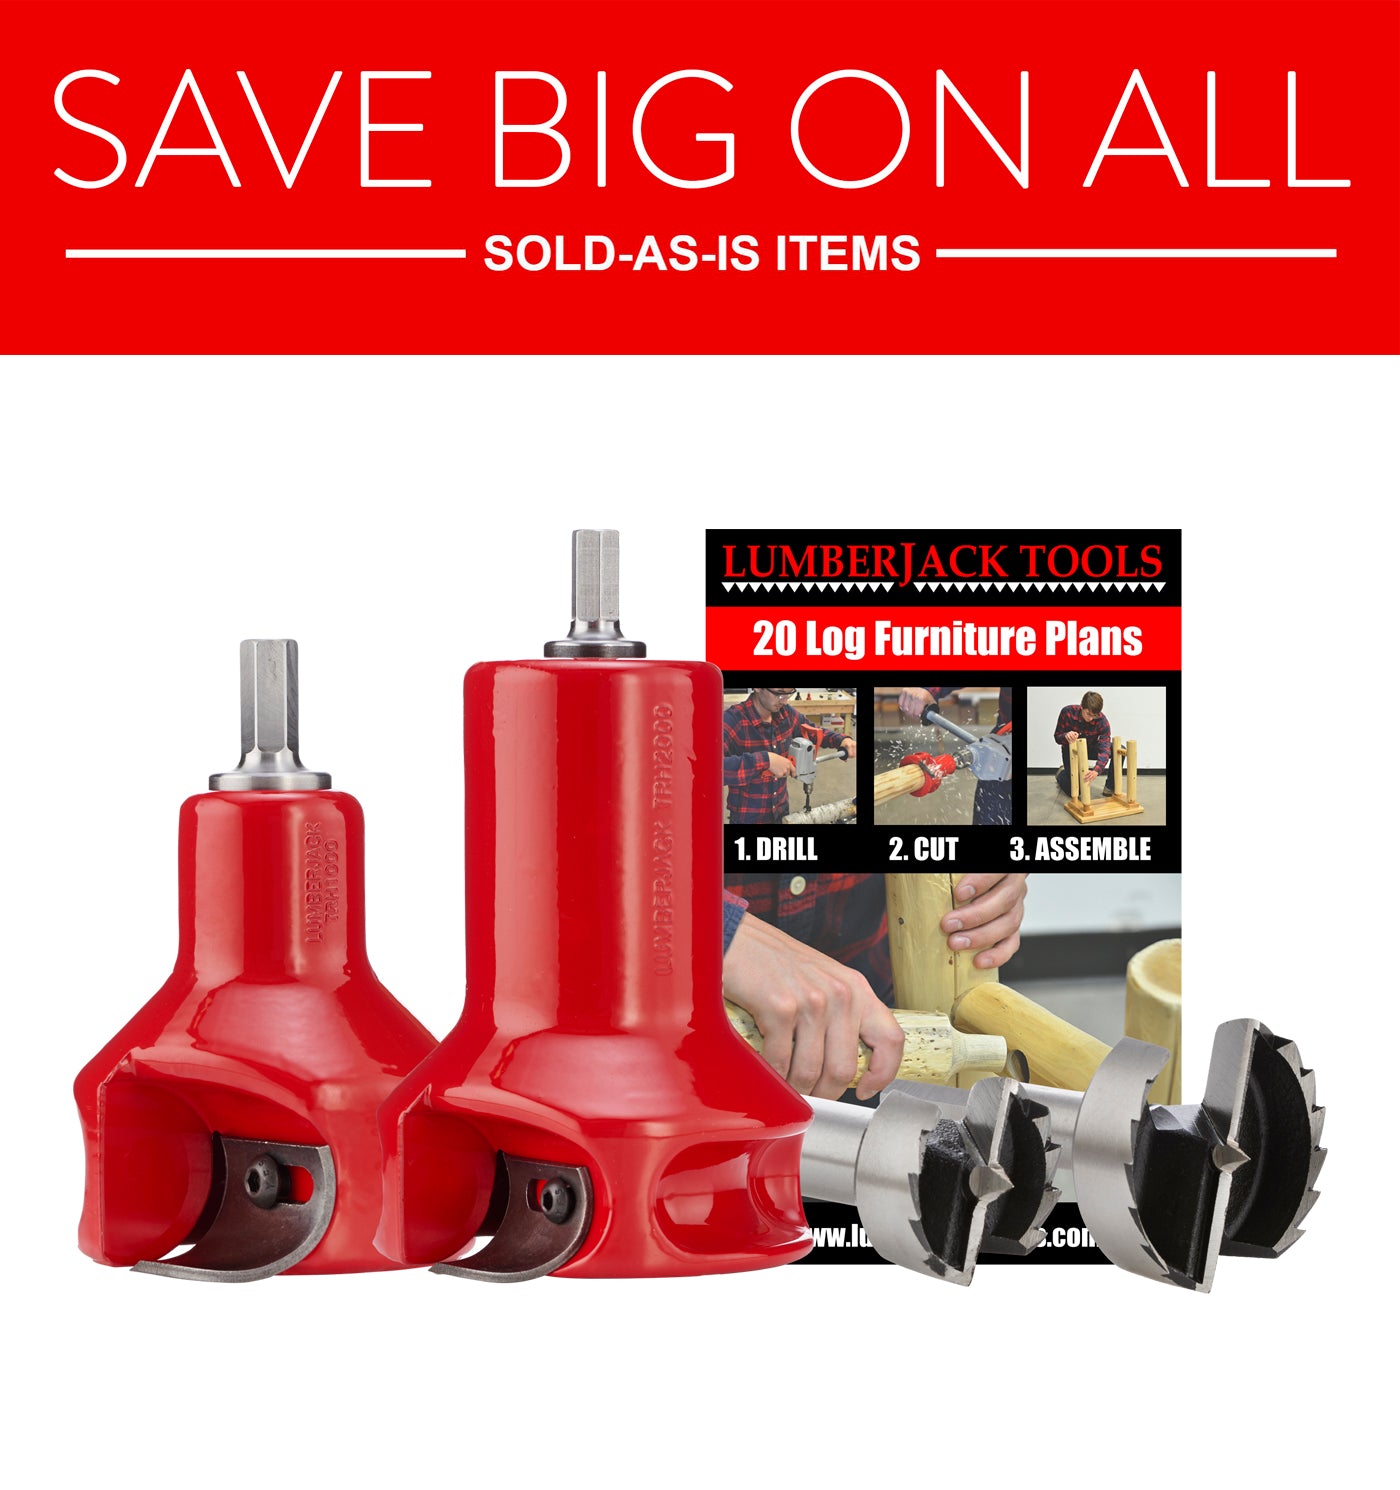 Sold as-is Home Series Starter Kit - tenon cutters